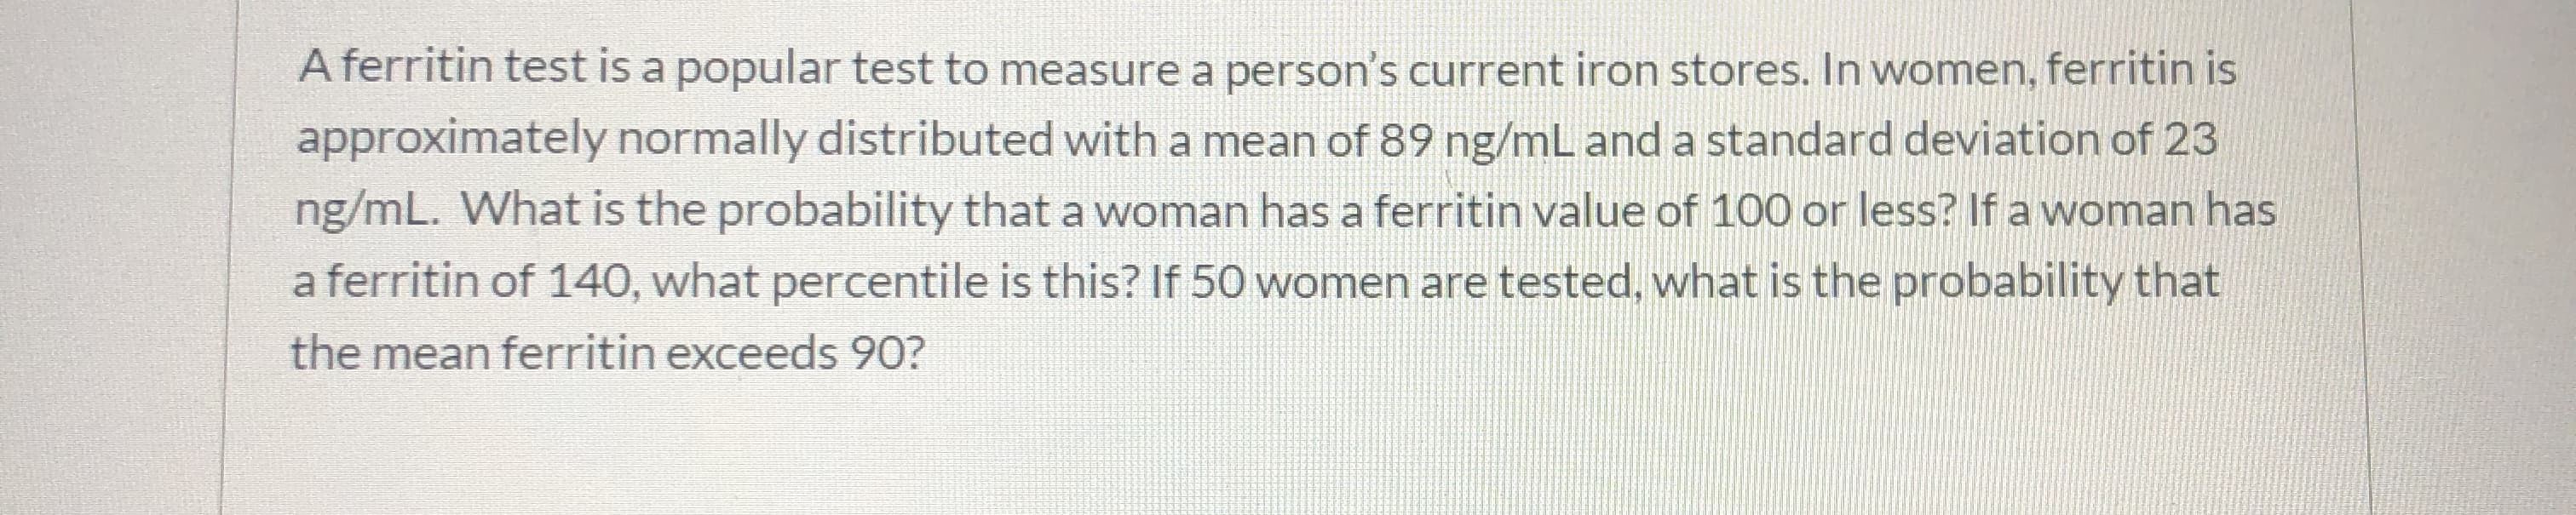 A ferritin test is a popular test to measure a person's current iron stores. In women, ferritin is
approximately normally distributed with a mean of 89 ng/mL and a standard deviation of 23
ng/mL. What is the probability that a woman has a ferritin value of 100 or less? If a woman has
a ferritin of 140, what percentile is this? If 50 women are tested, what is the probability that
the mean ferritin exceeds 90?
